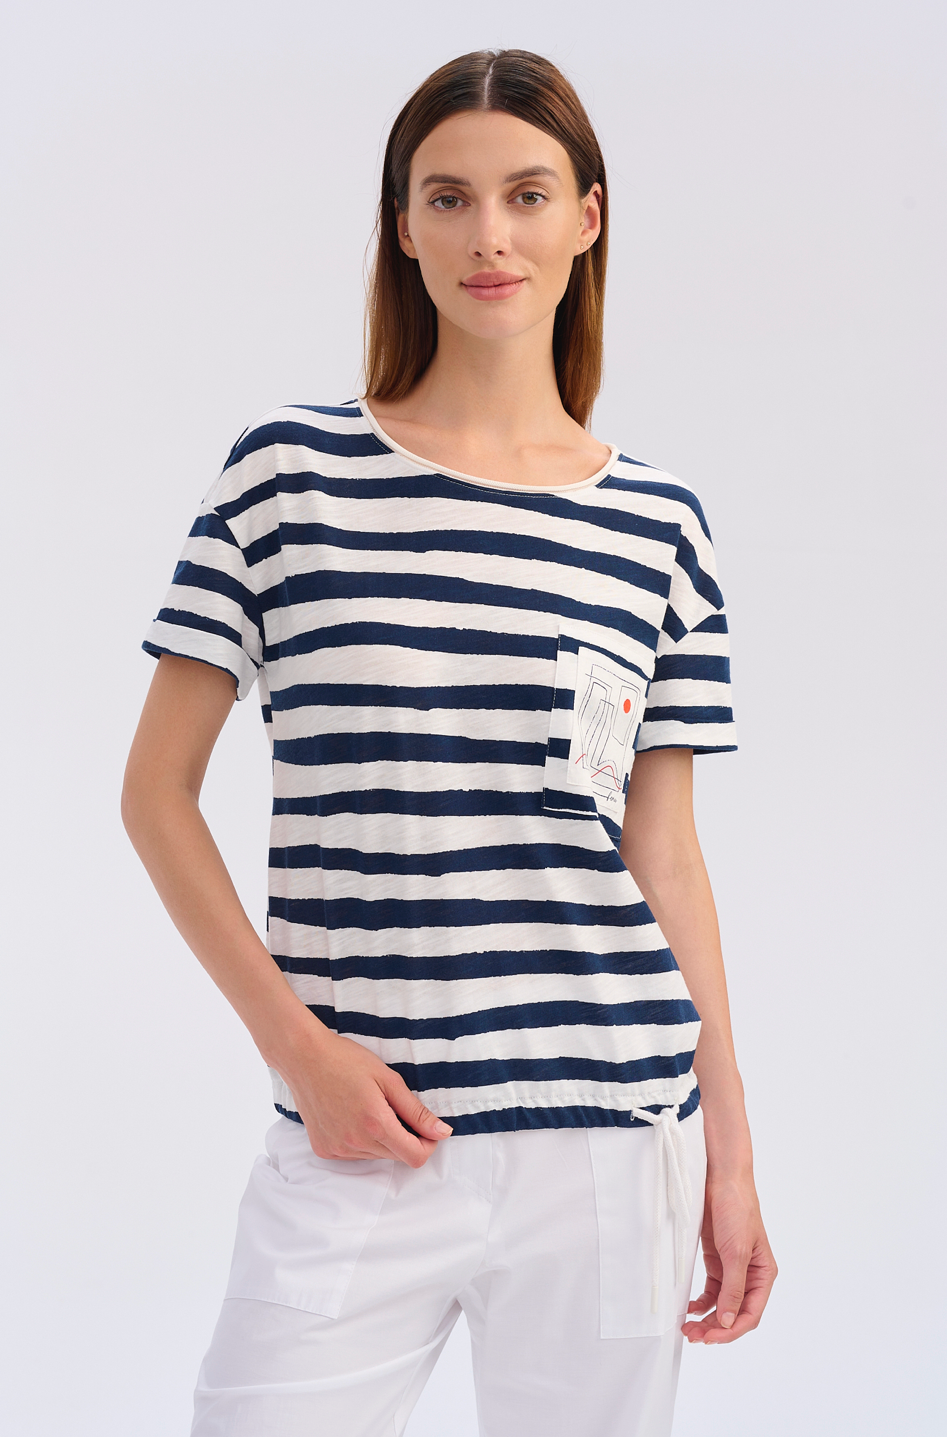 FERIA casual and sports t-shirt in a nautical style